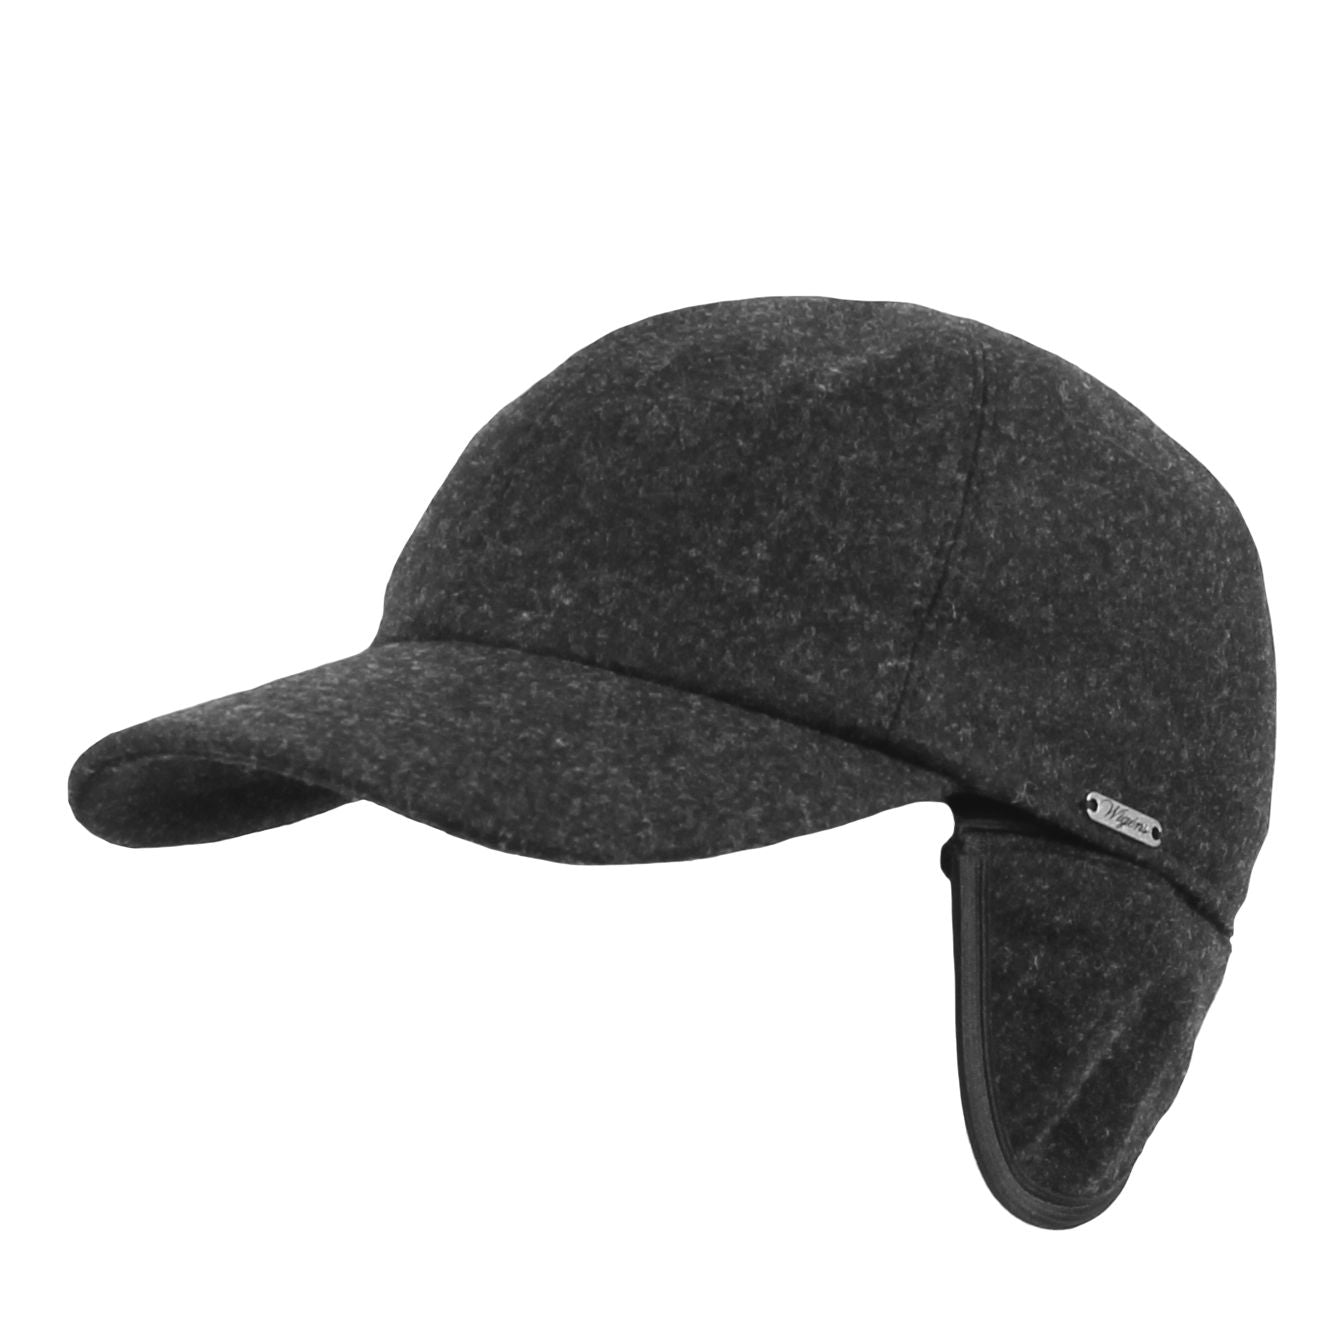 Melton Wool Baseball Classic Cap with Earflaps (Choice of Colors) by Wigens